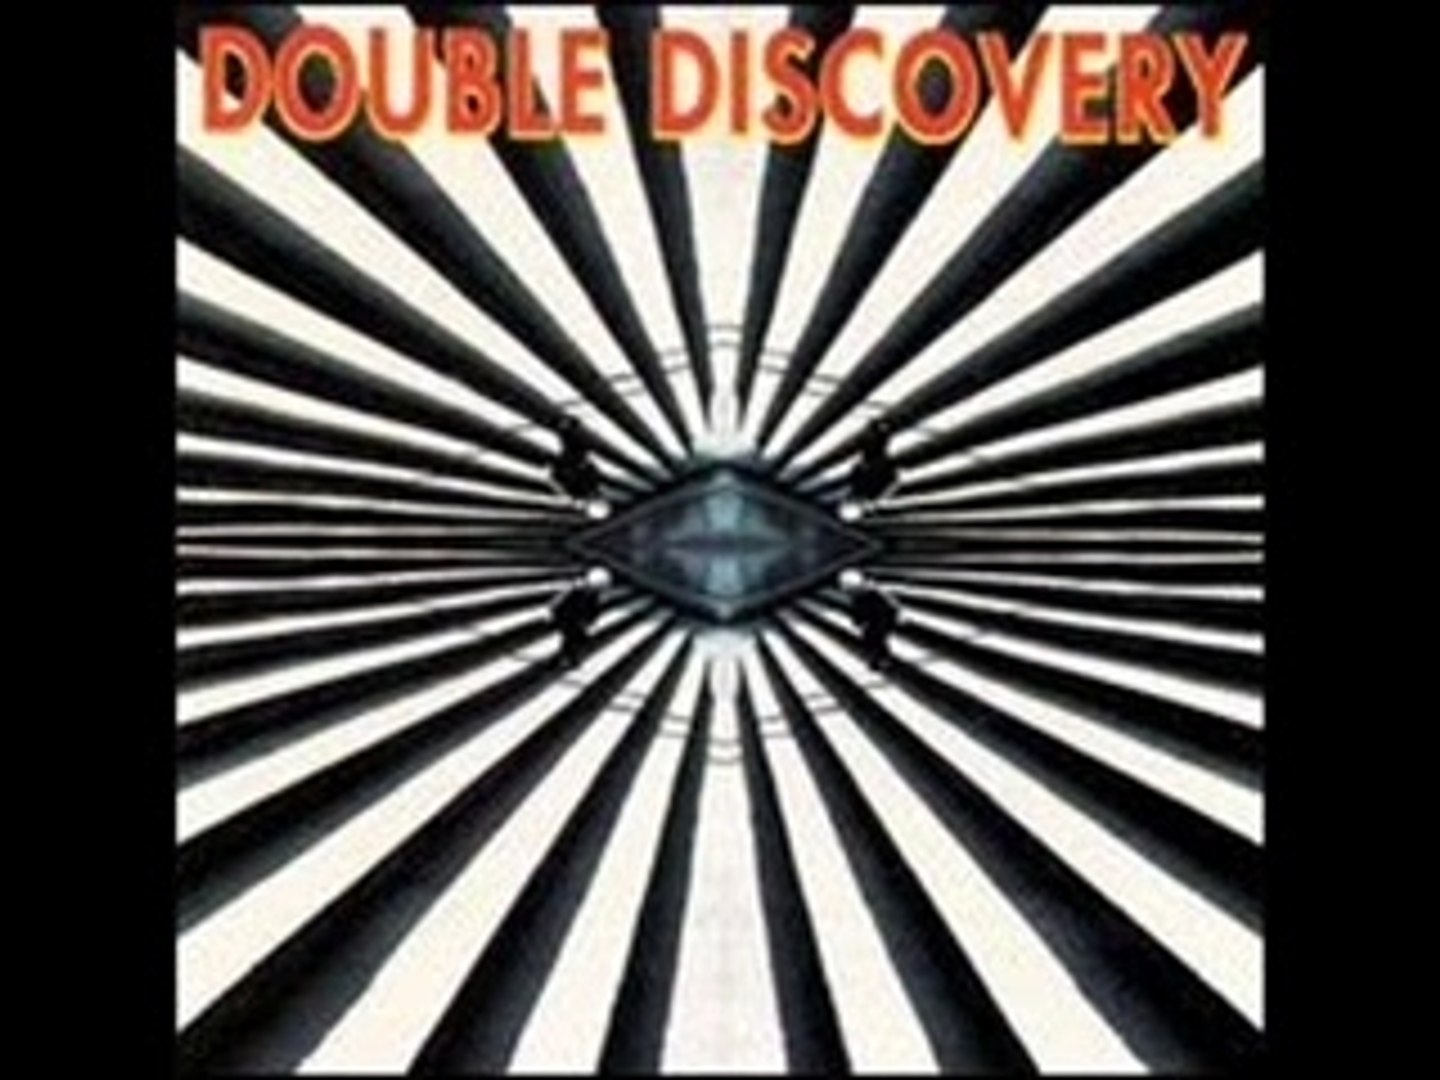 Double discovery